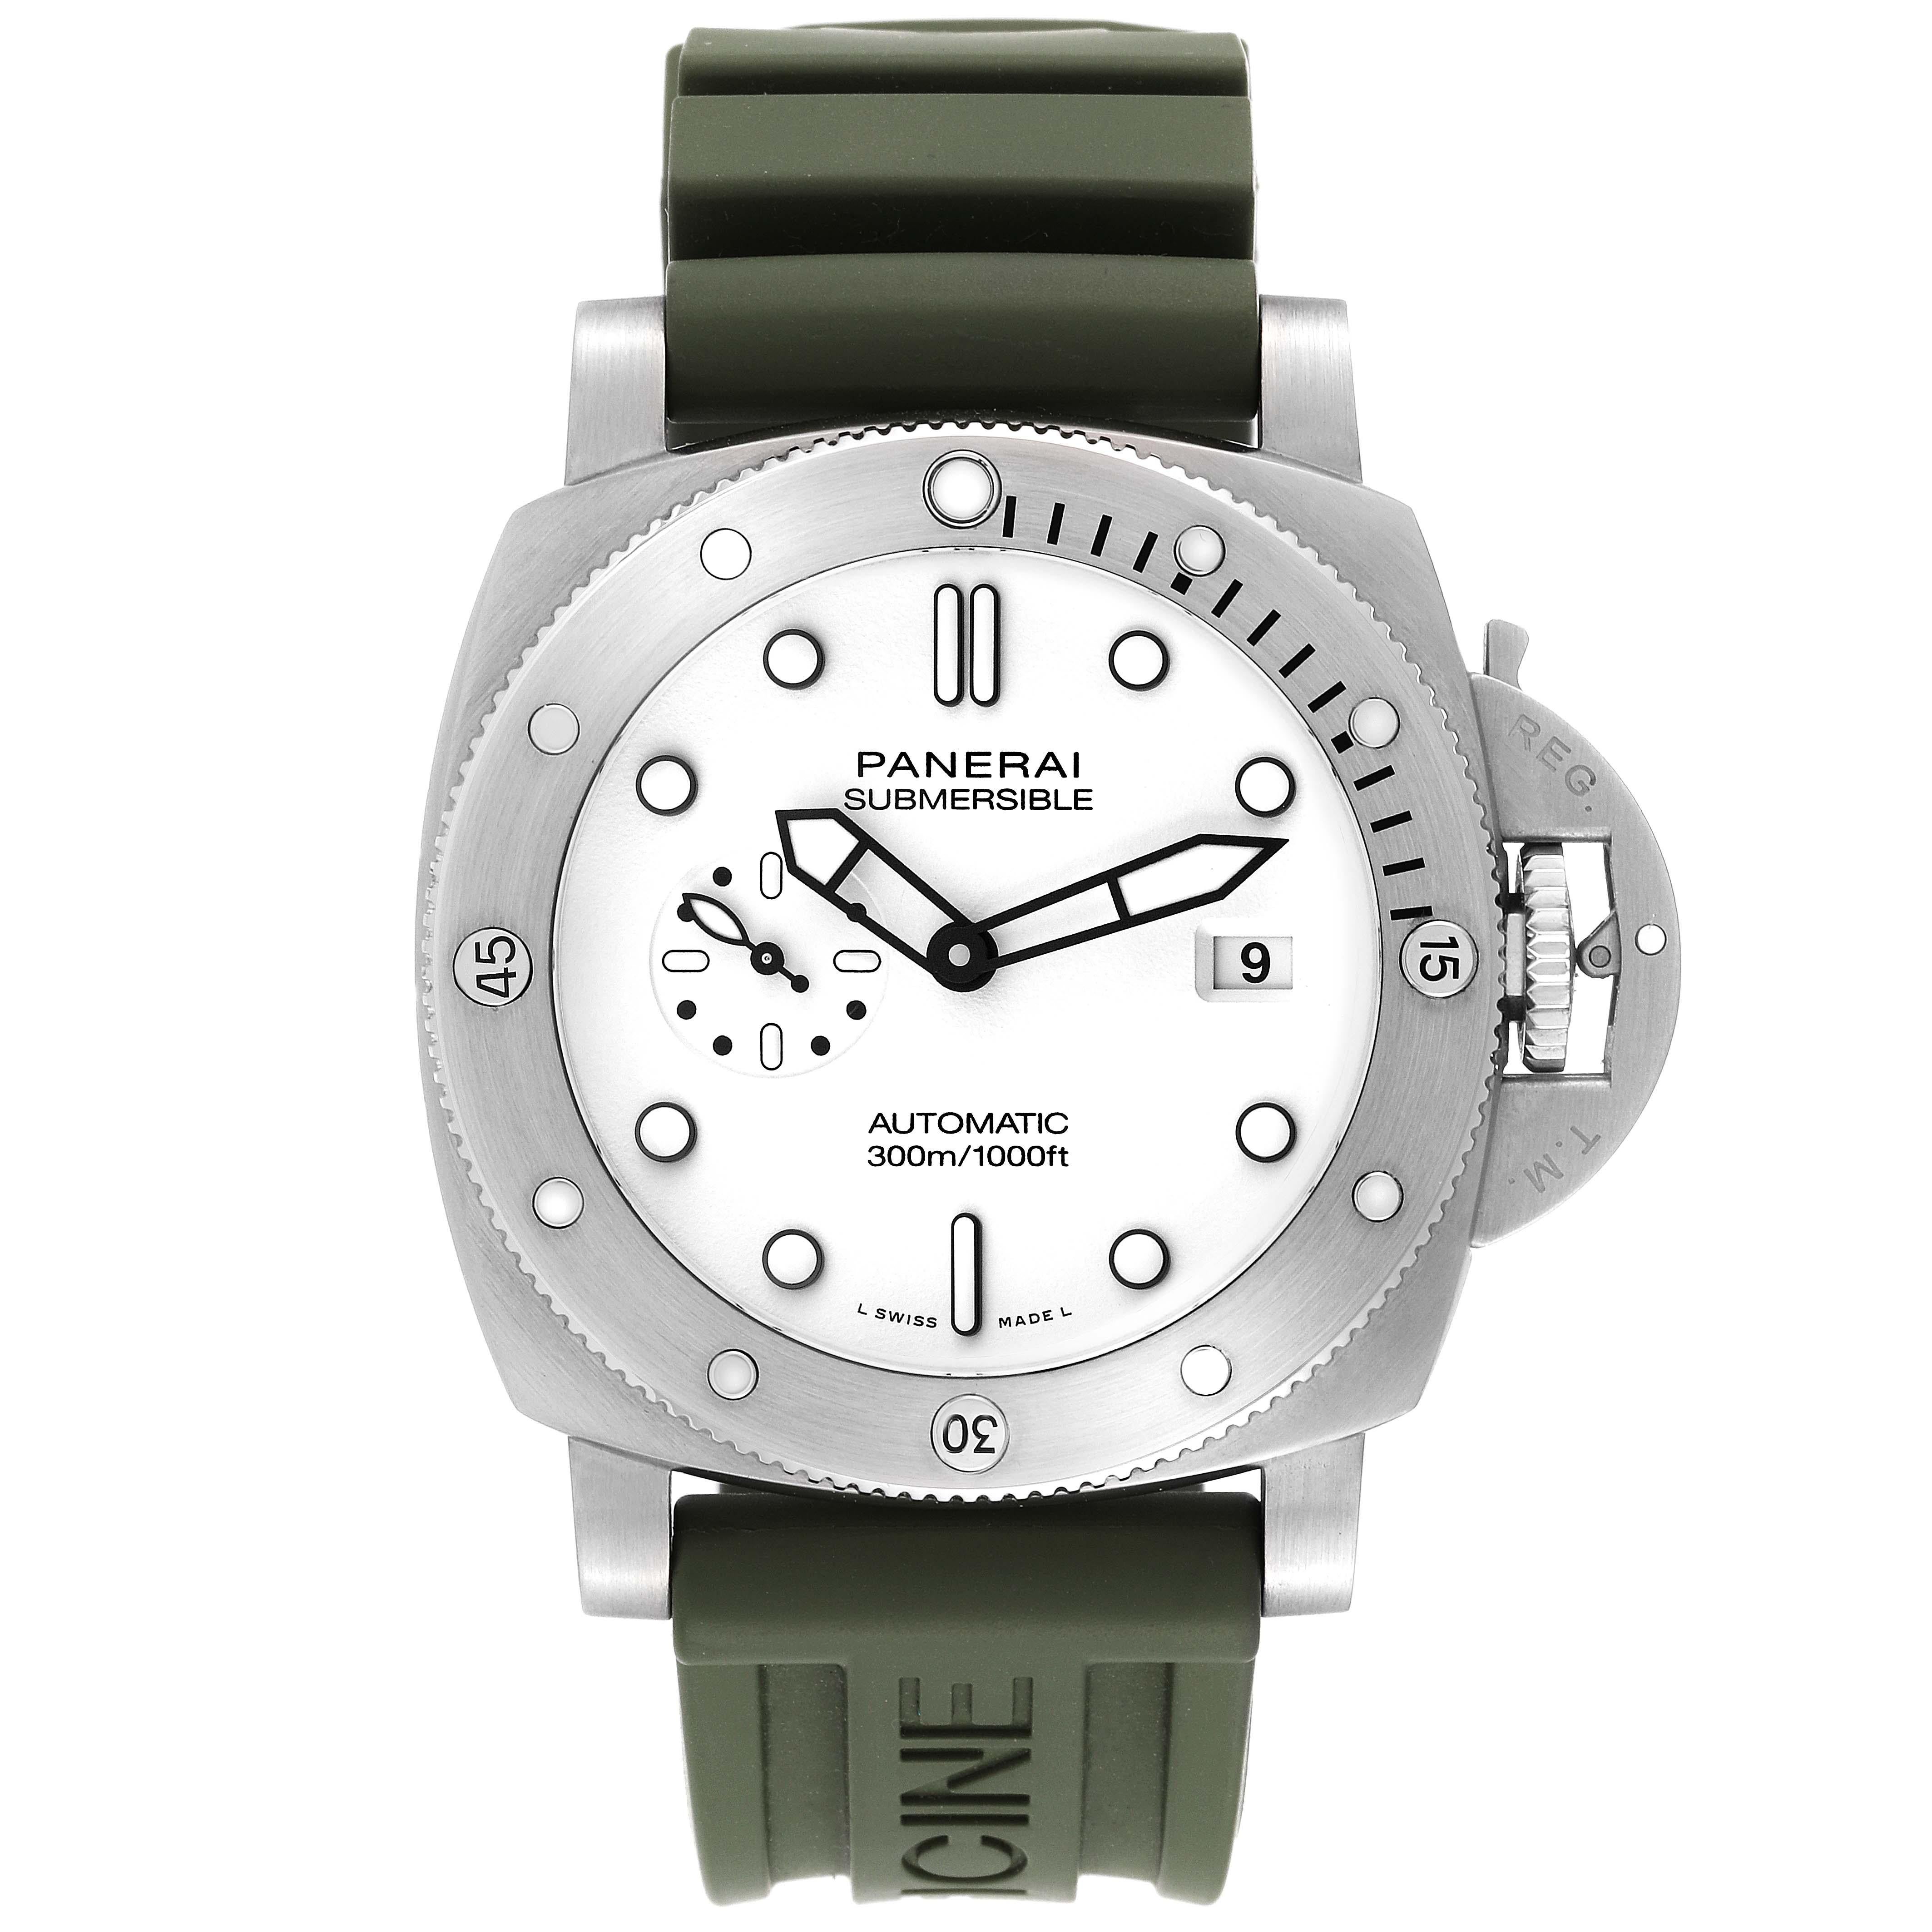 Panerai Submersible QuarantaQuattro Bianco Steel Mens Watch PAM01226 Box Card. Automatic self-winding movement. Stainless steel cushion case, 44.0 mm in diameter. Panerai patented crown protector. Unidirectional rotating diver's bezel. Scratch